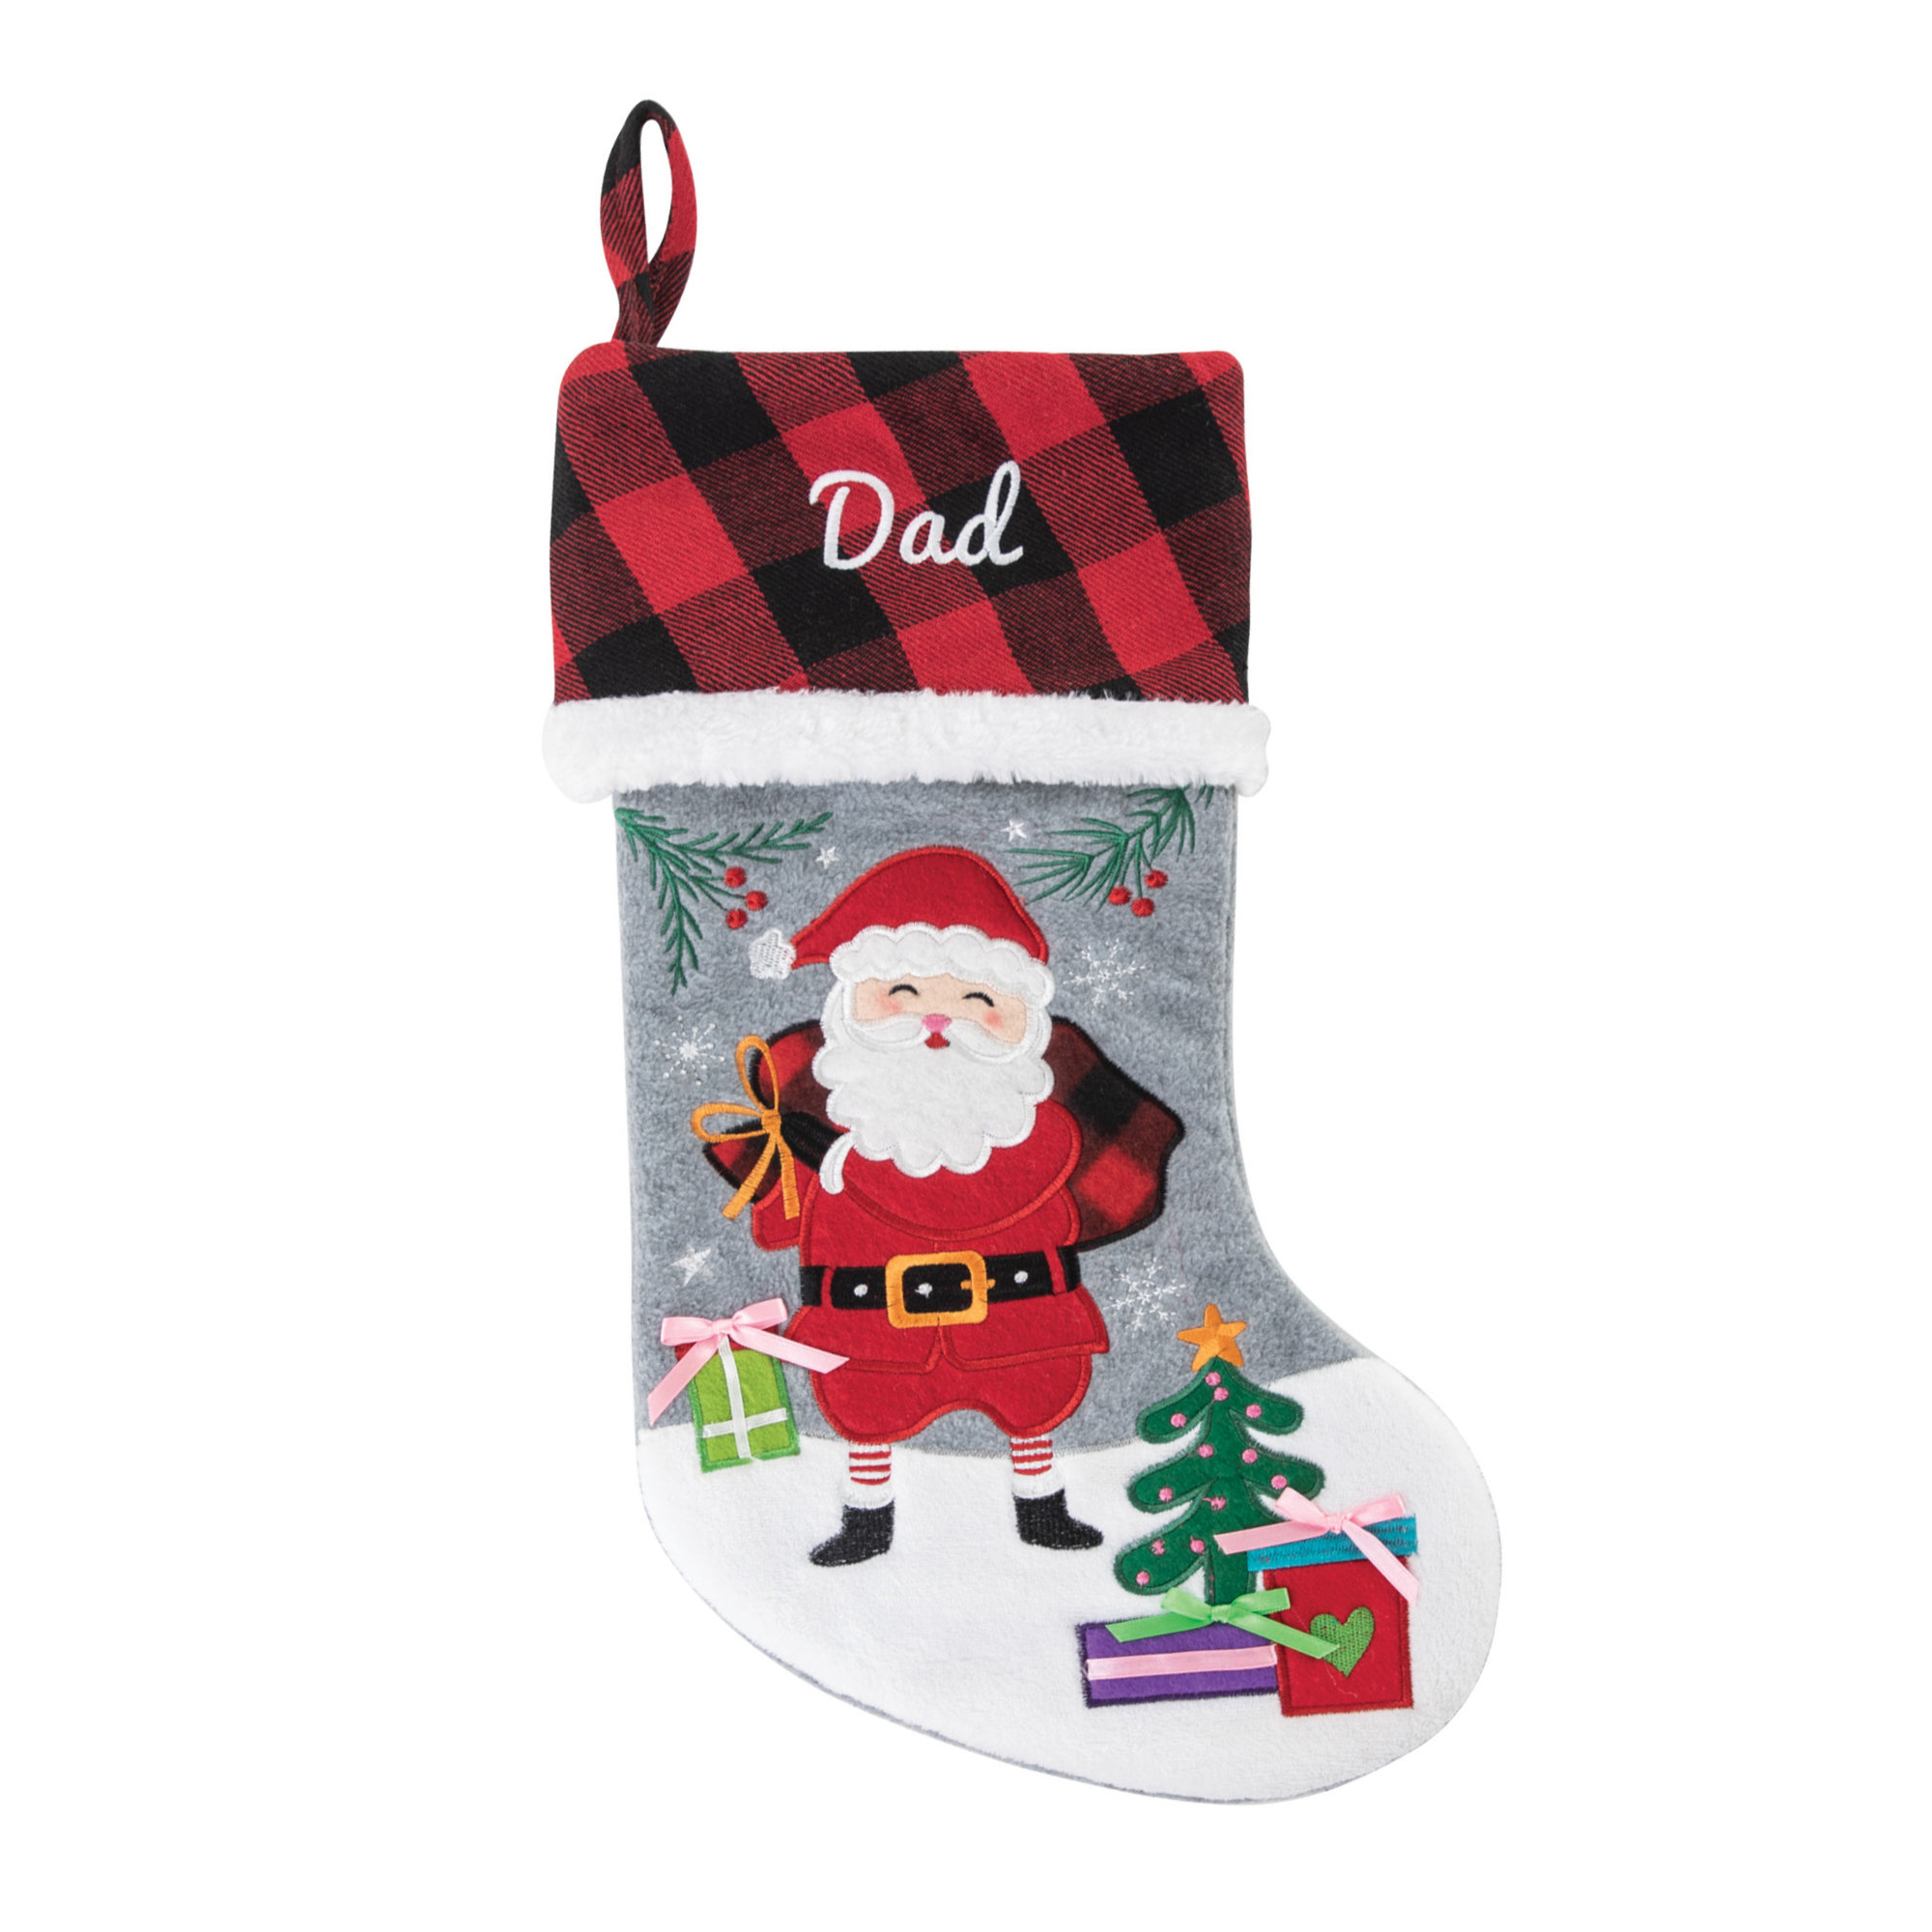 Tiger and Holly Stocking Kit